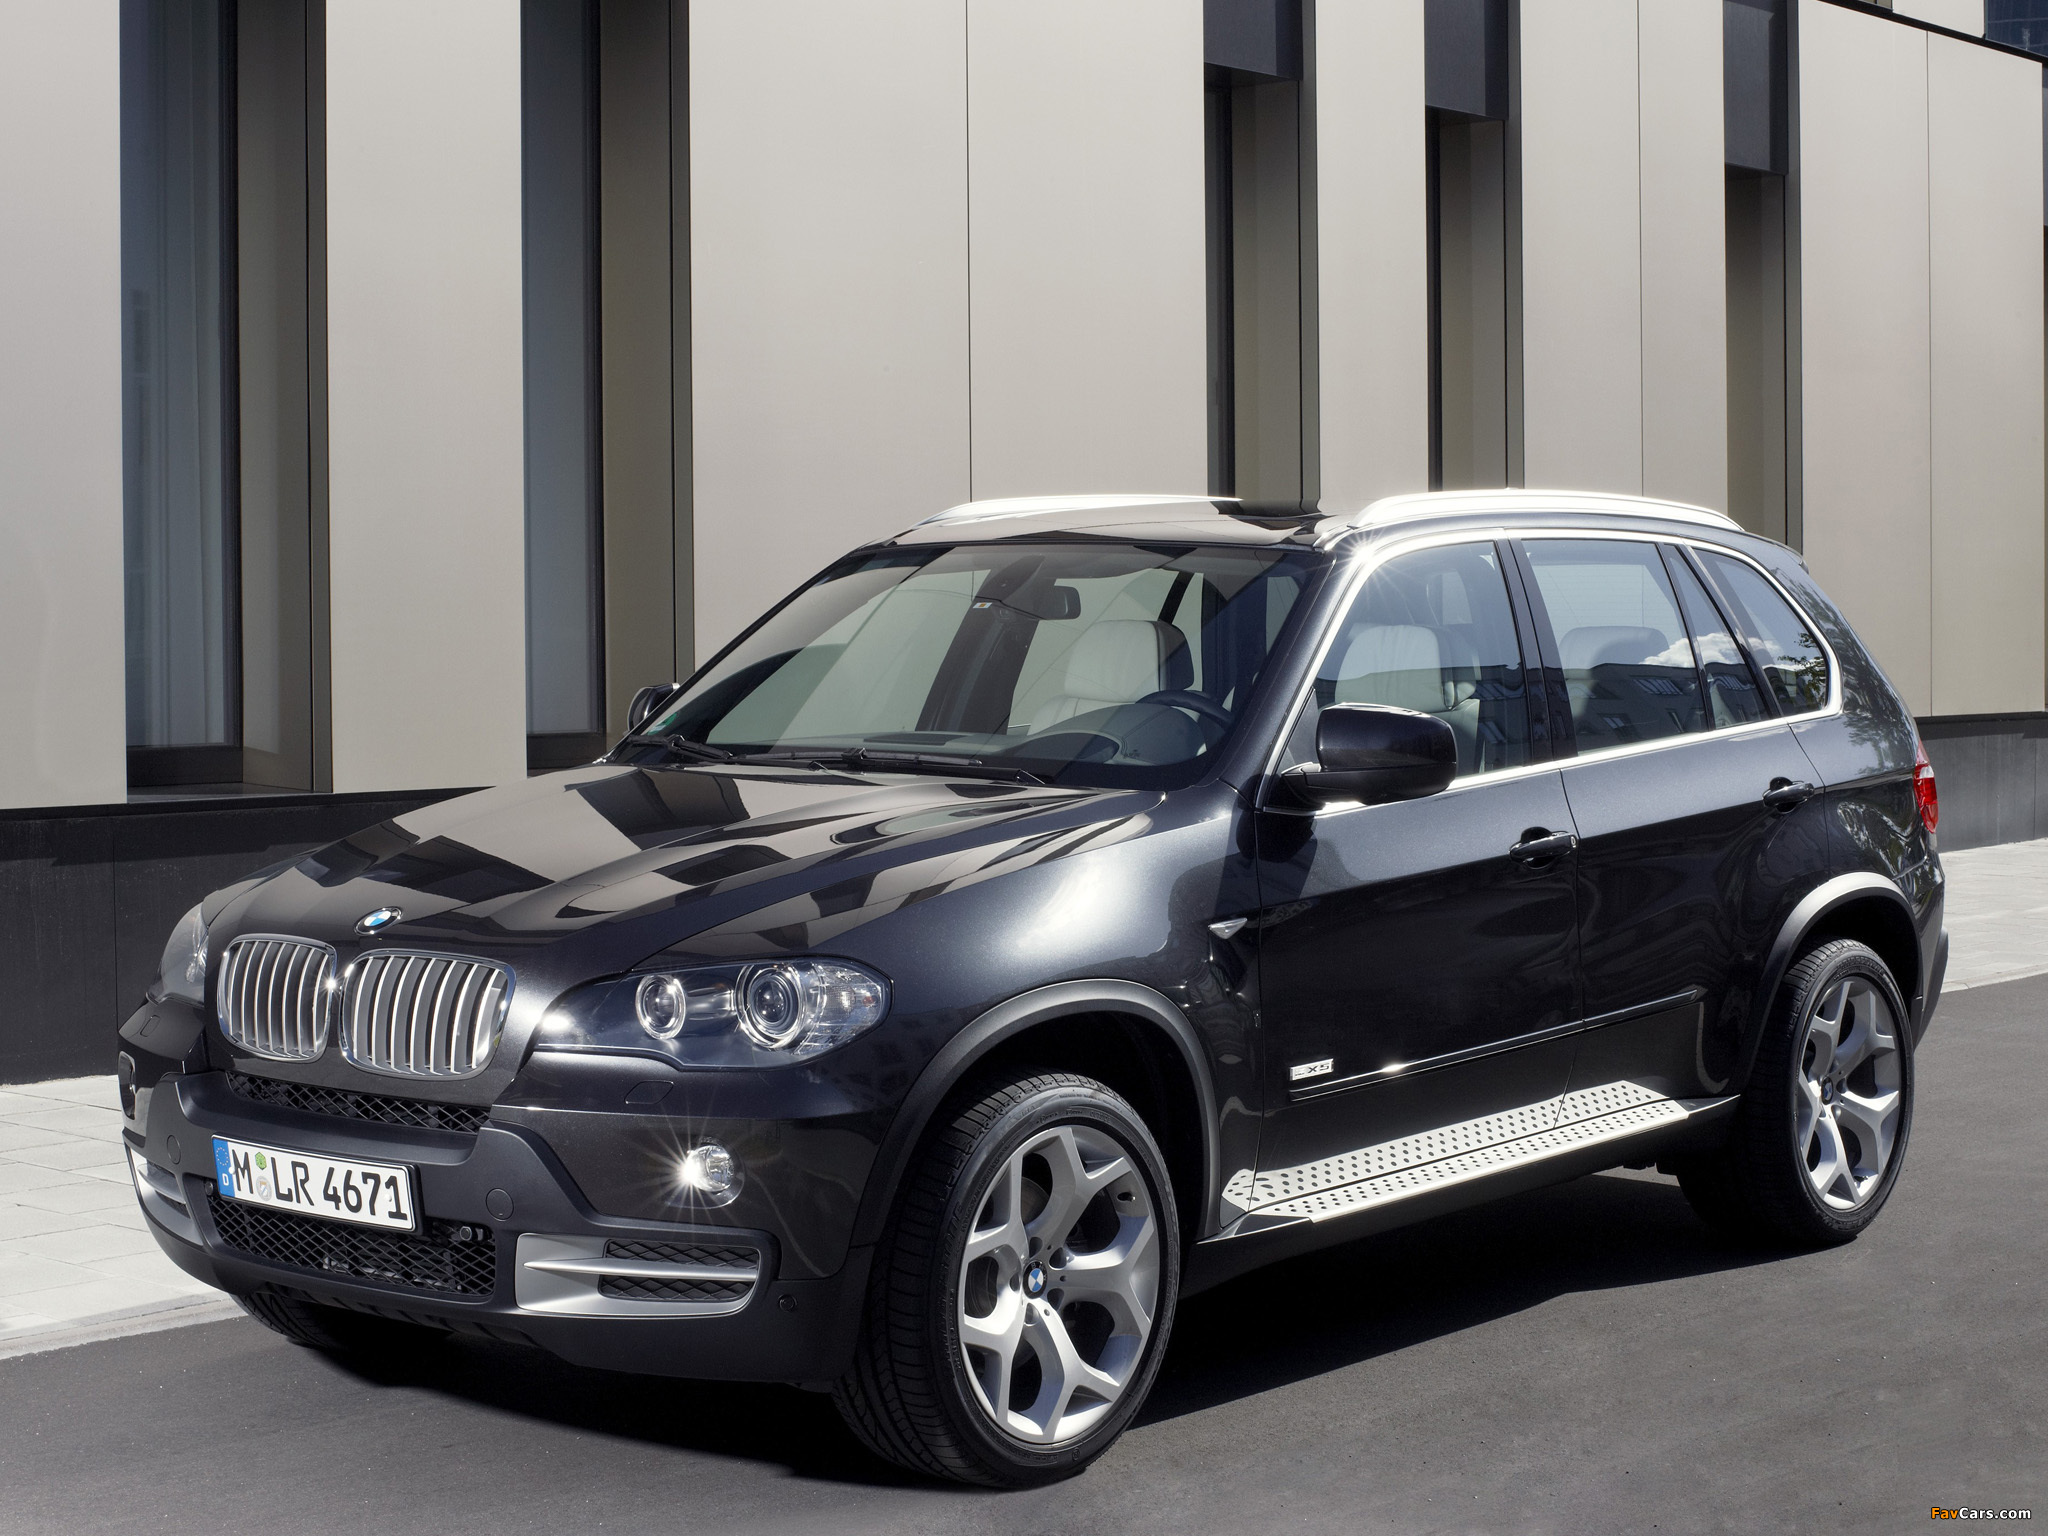 BMW X5 xDrive35d 10 Year Edition (E70) 2009 wallpapers (2048 x 1536)